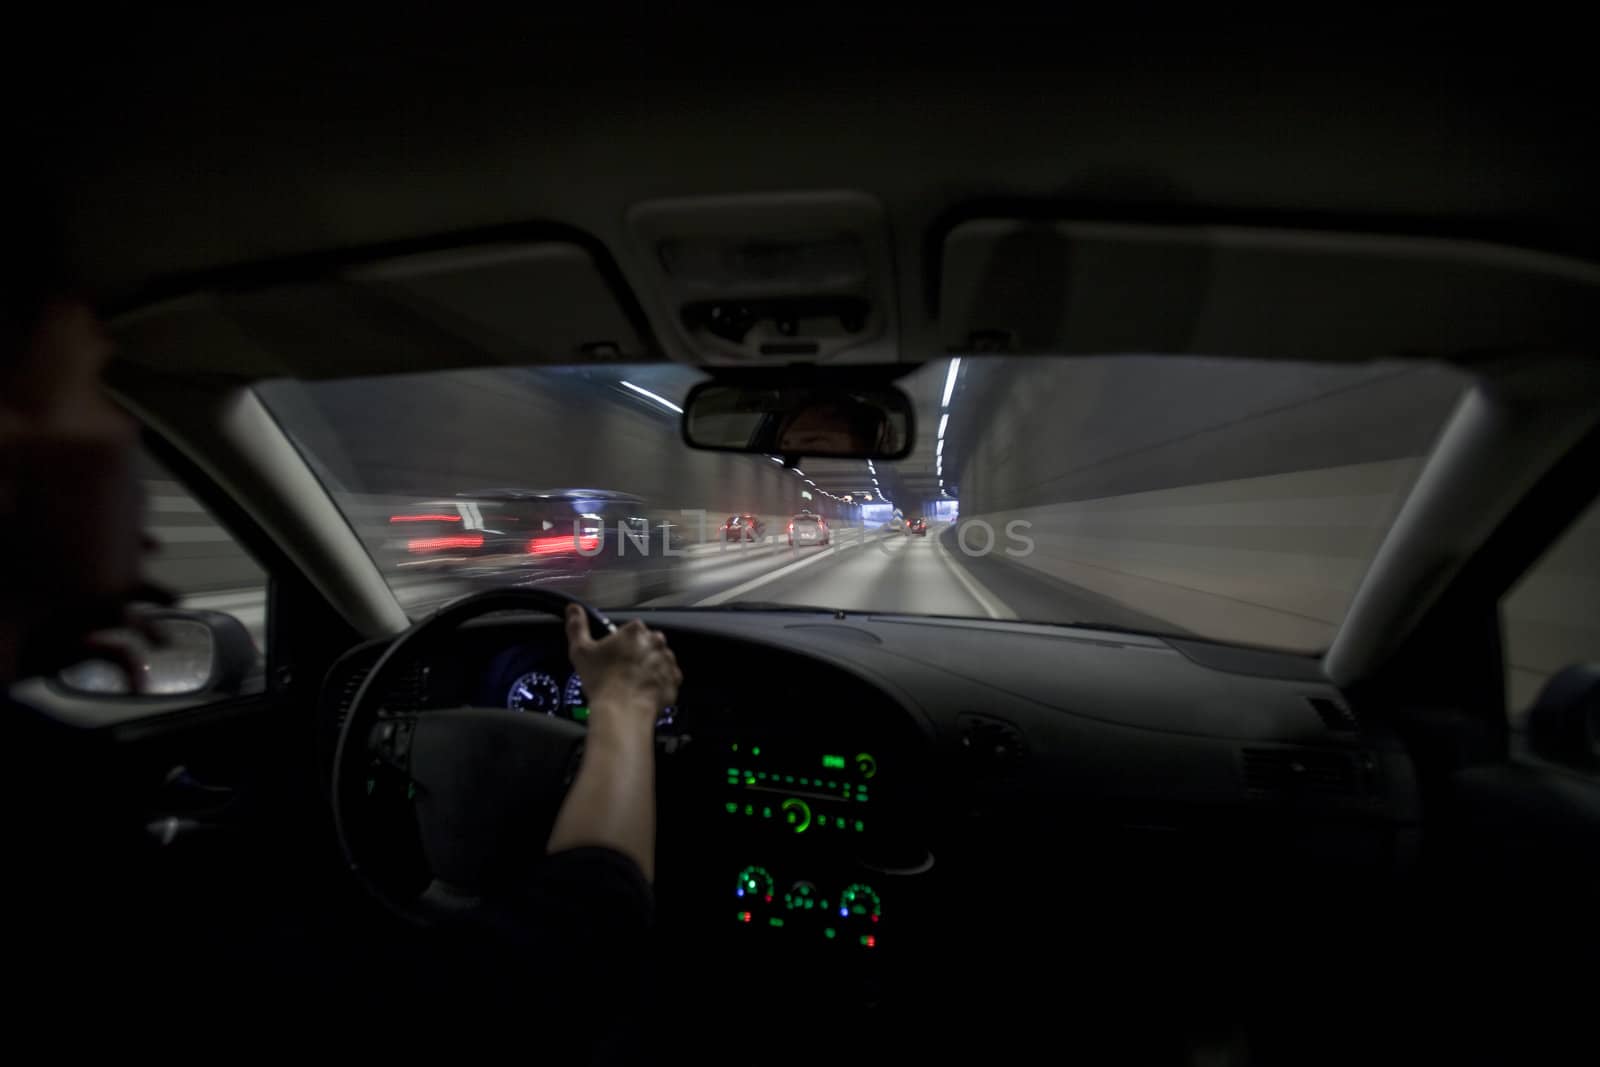 Man driving through a tunnel at night time